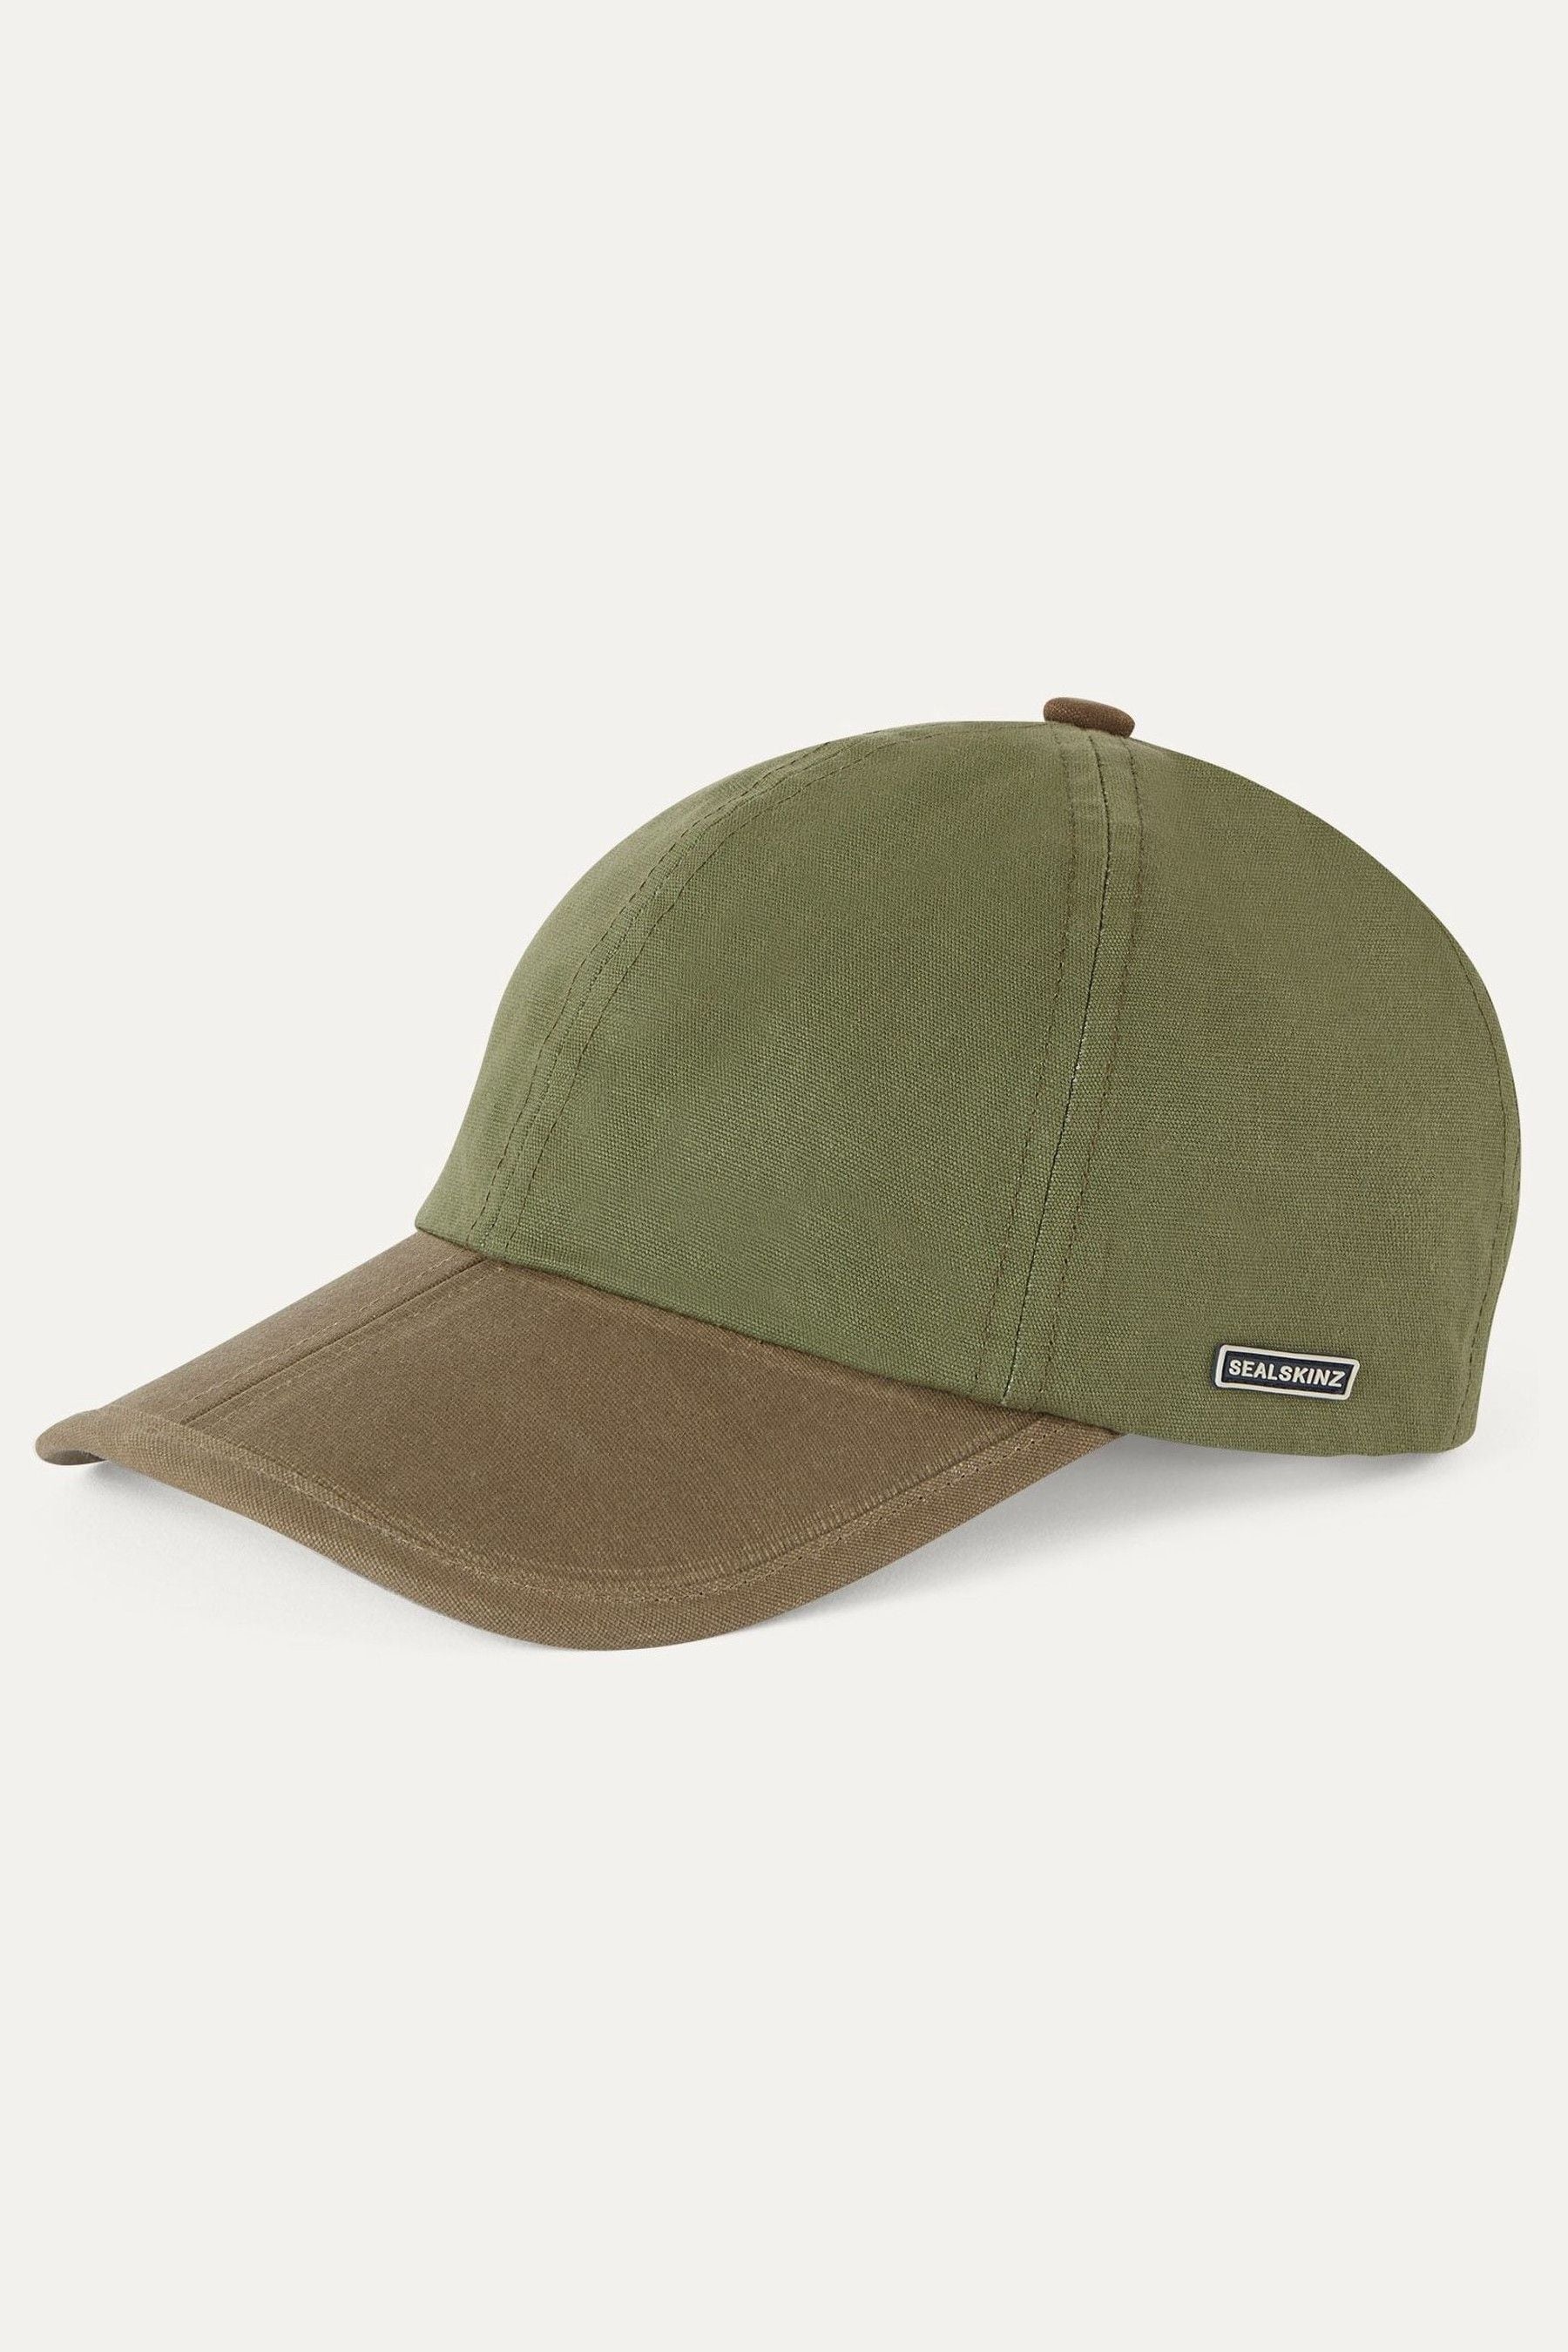 Buy Sealskinz Marham Waterproof Oiled Canvas Cap from the Next UK ...